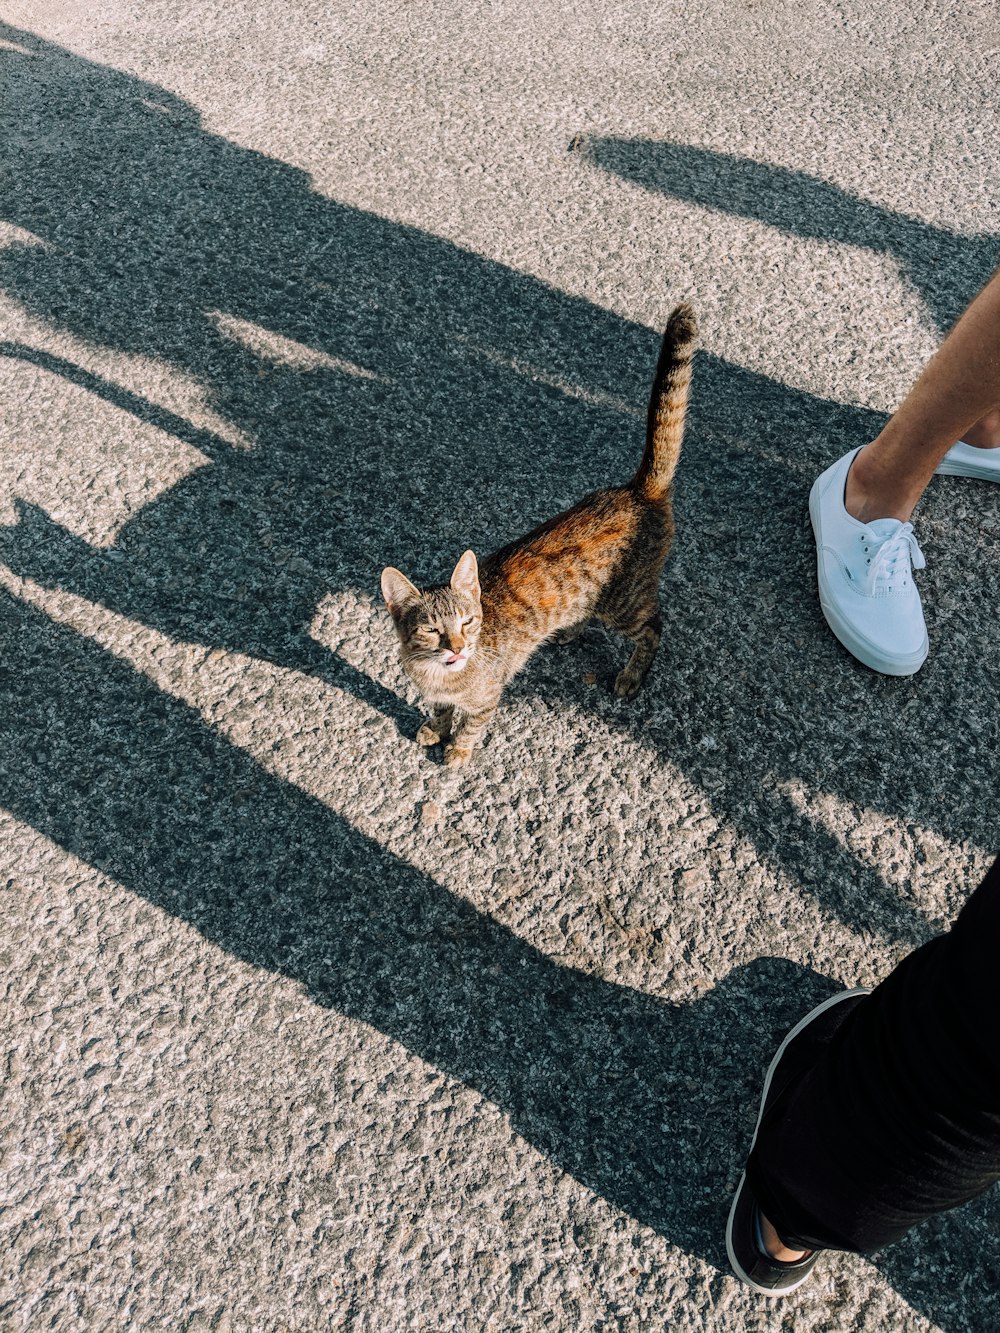 cat by person's feet